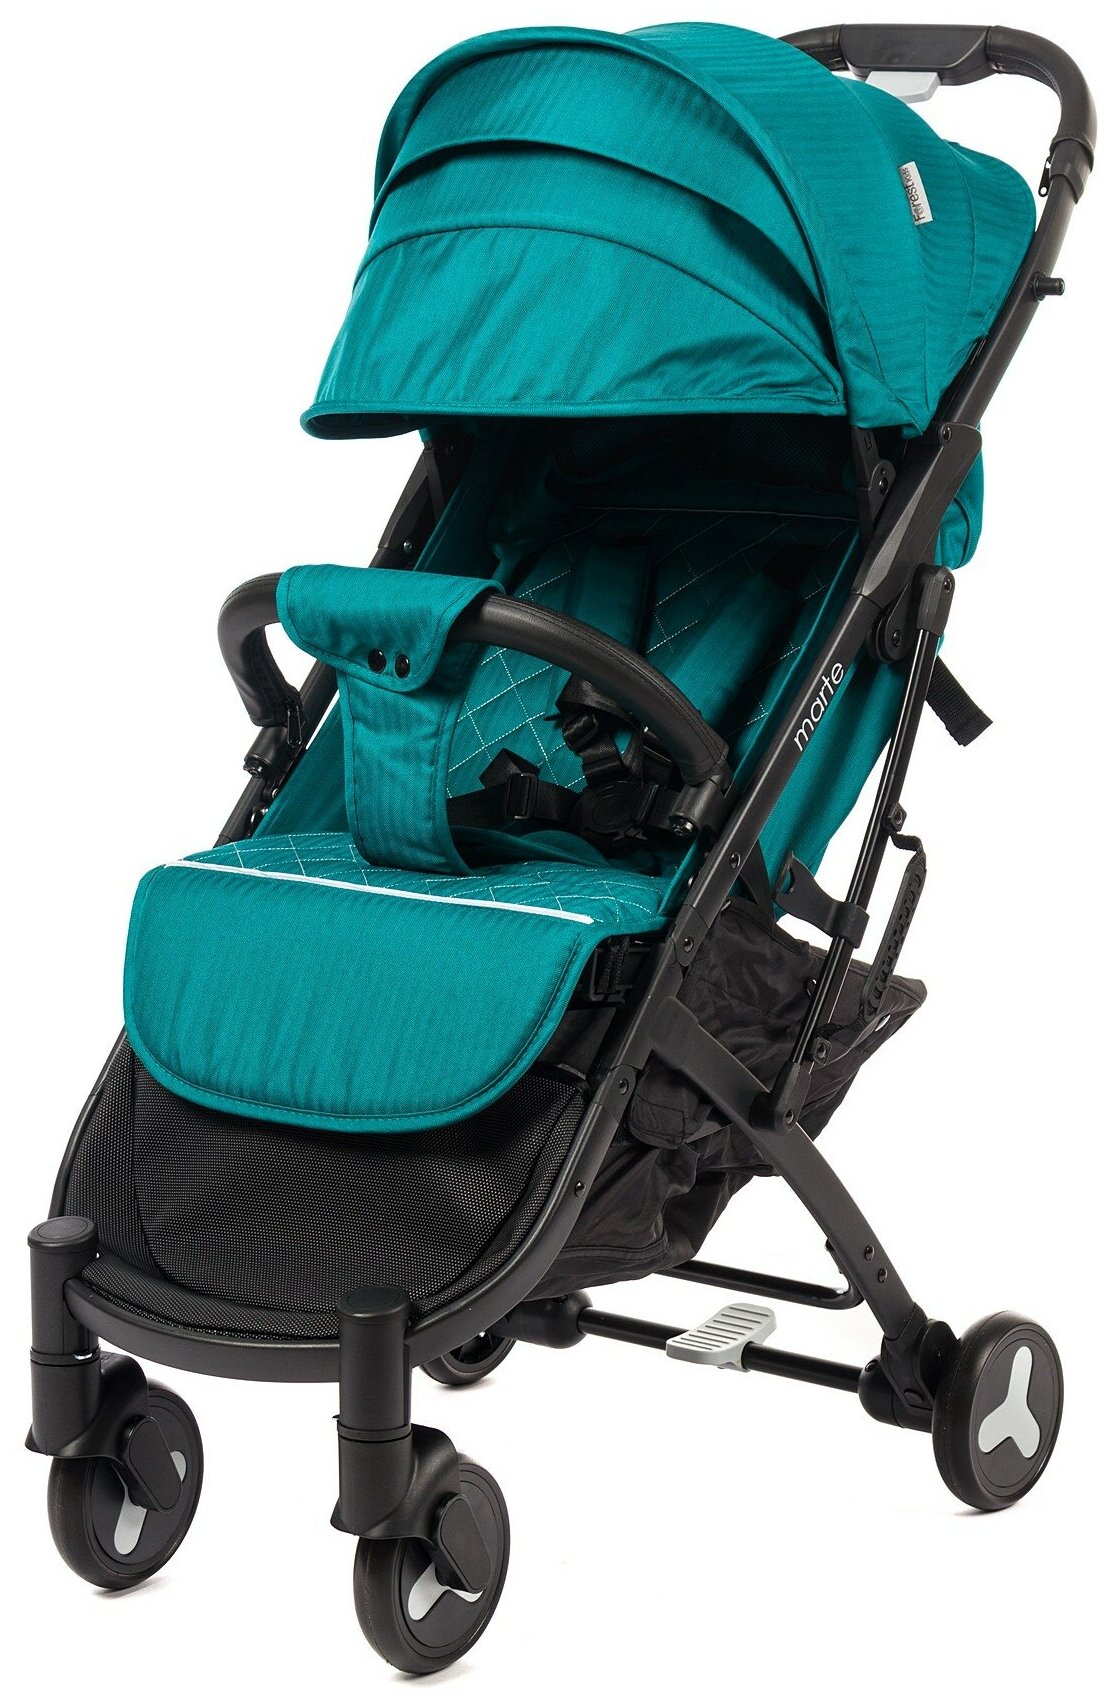 Прогулочная коляска Forest kids Marte Turquoise